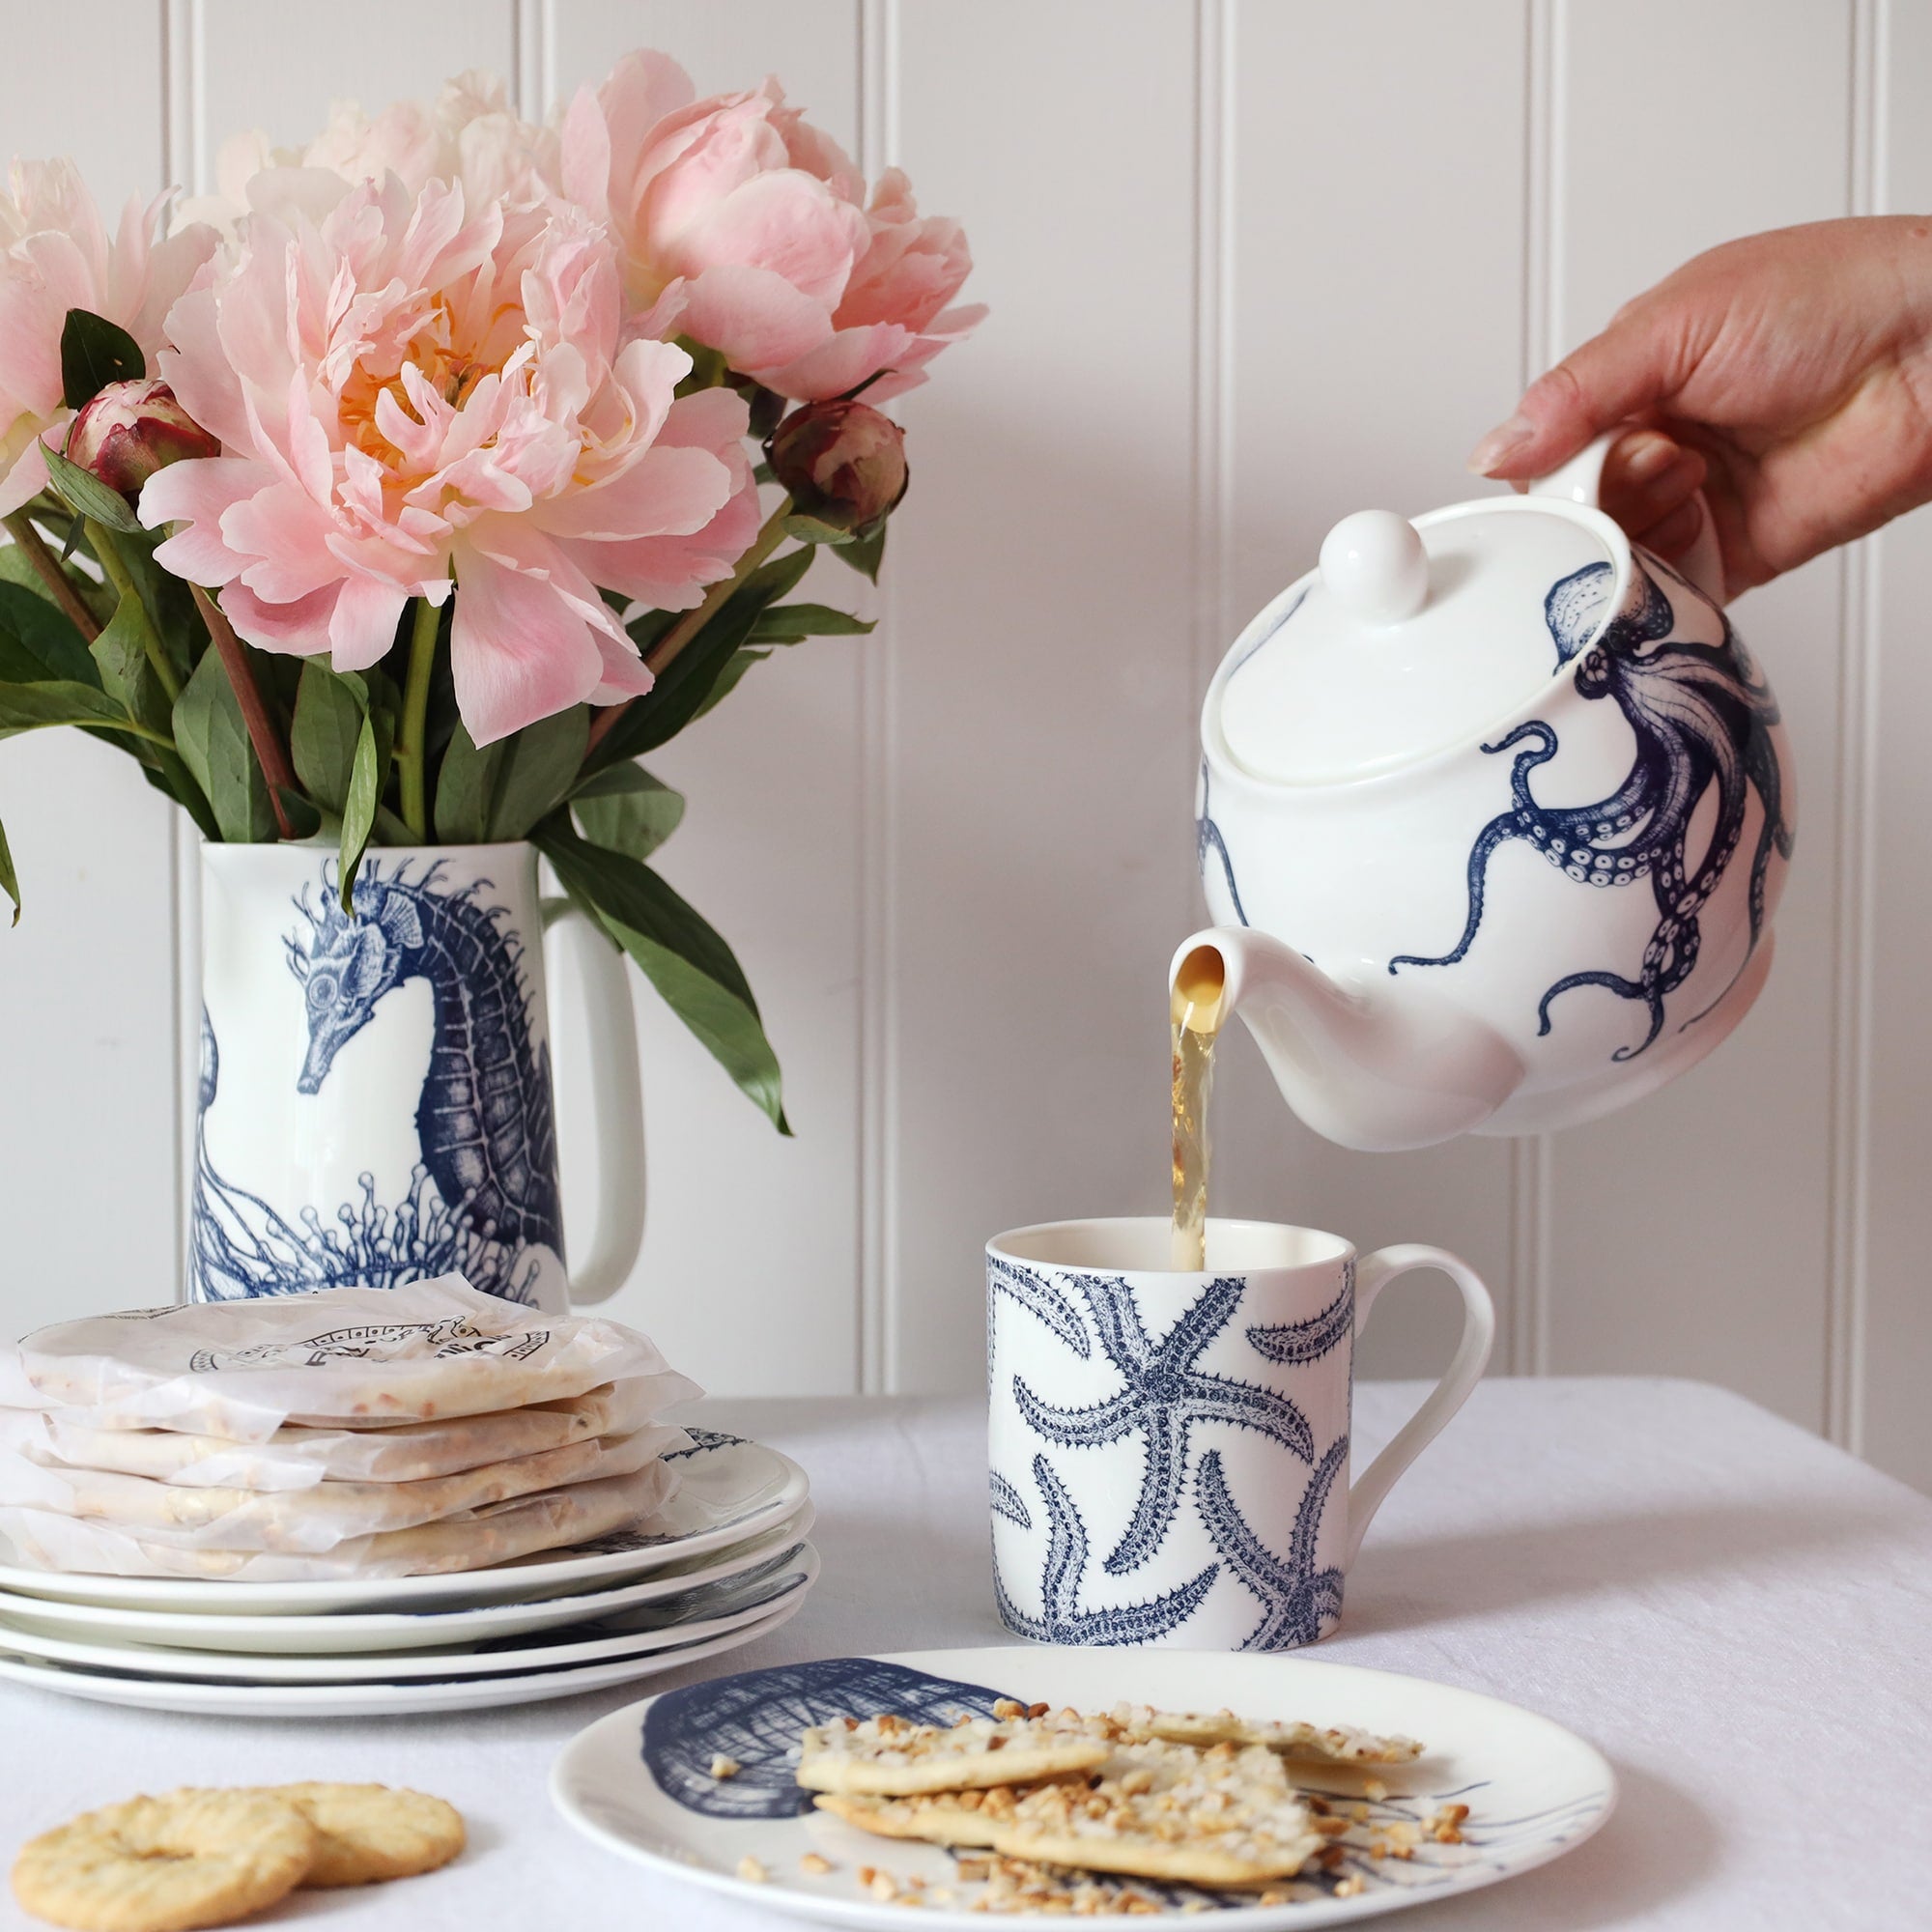 A blue & white informal table setting set against a white shiplap wall and linen tablecloth. An octopus design adorns a teapot which is pouring tea into a white bone china mug decorated with a blue illustrated multi starfish design..